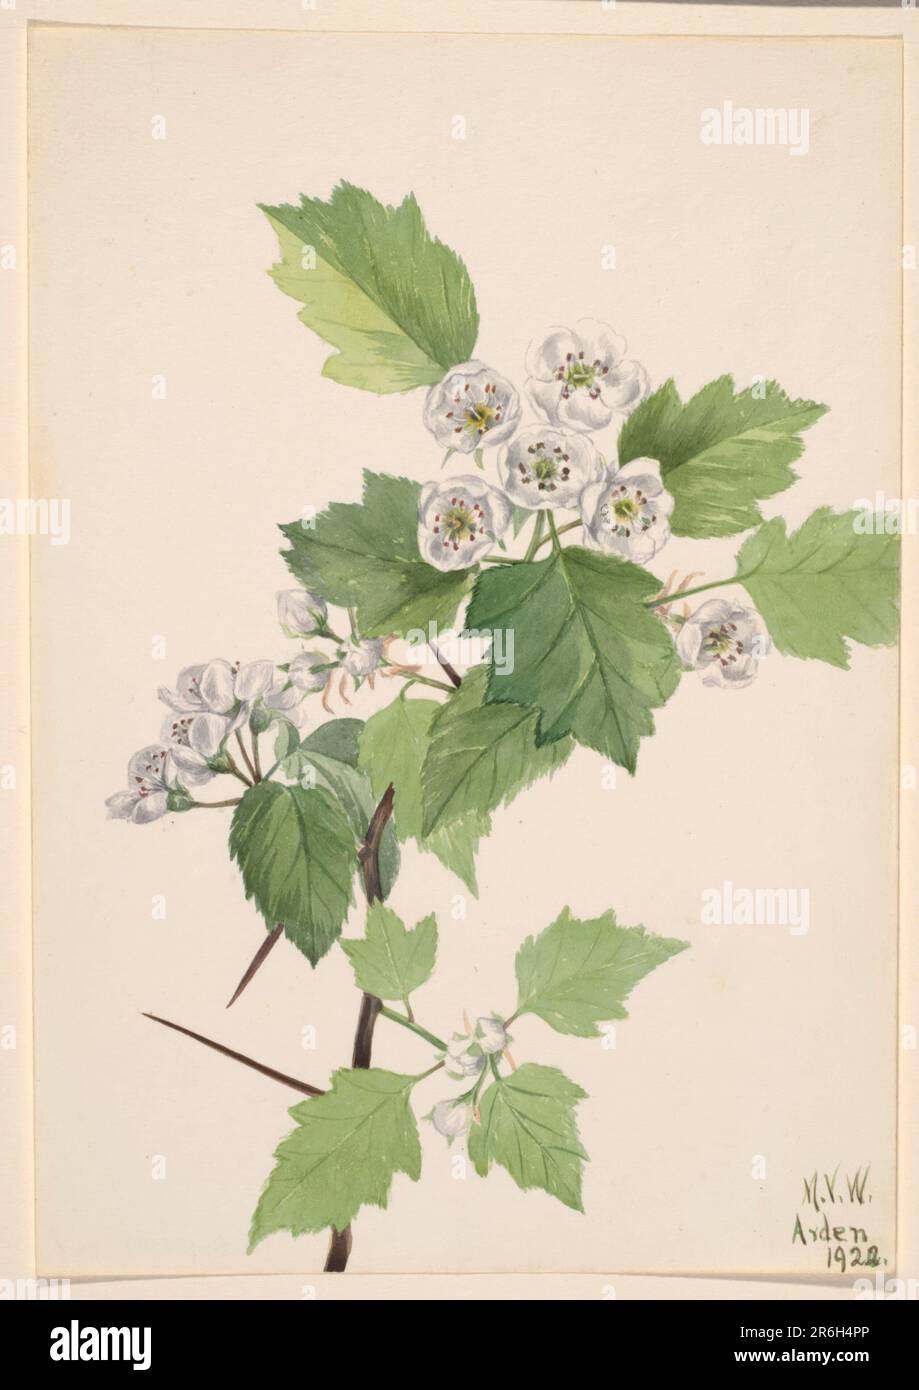 Thicket Hawthorn (Crataegus coccinea). Date: 1922. Watercolor on paper. Museum: Smithsonian American Art Museum. Stock Photo